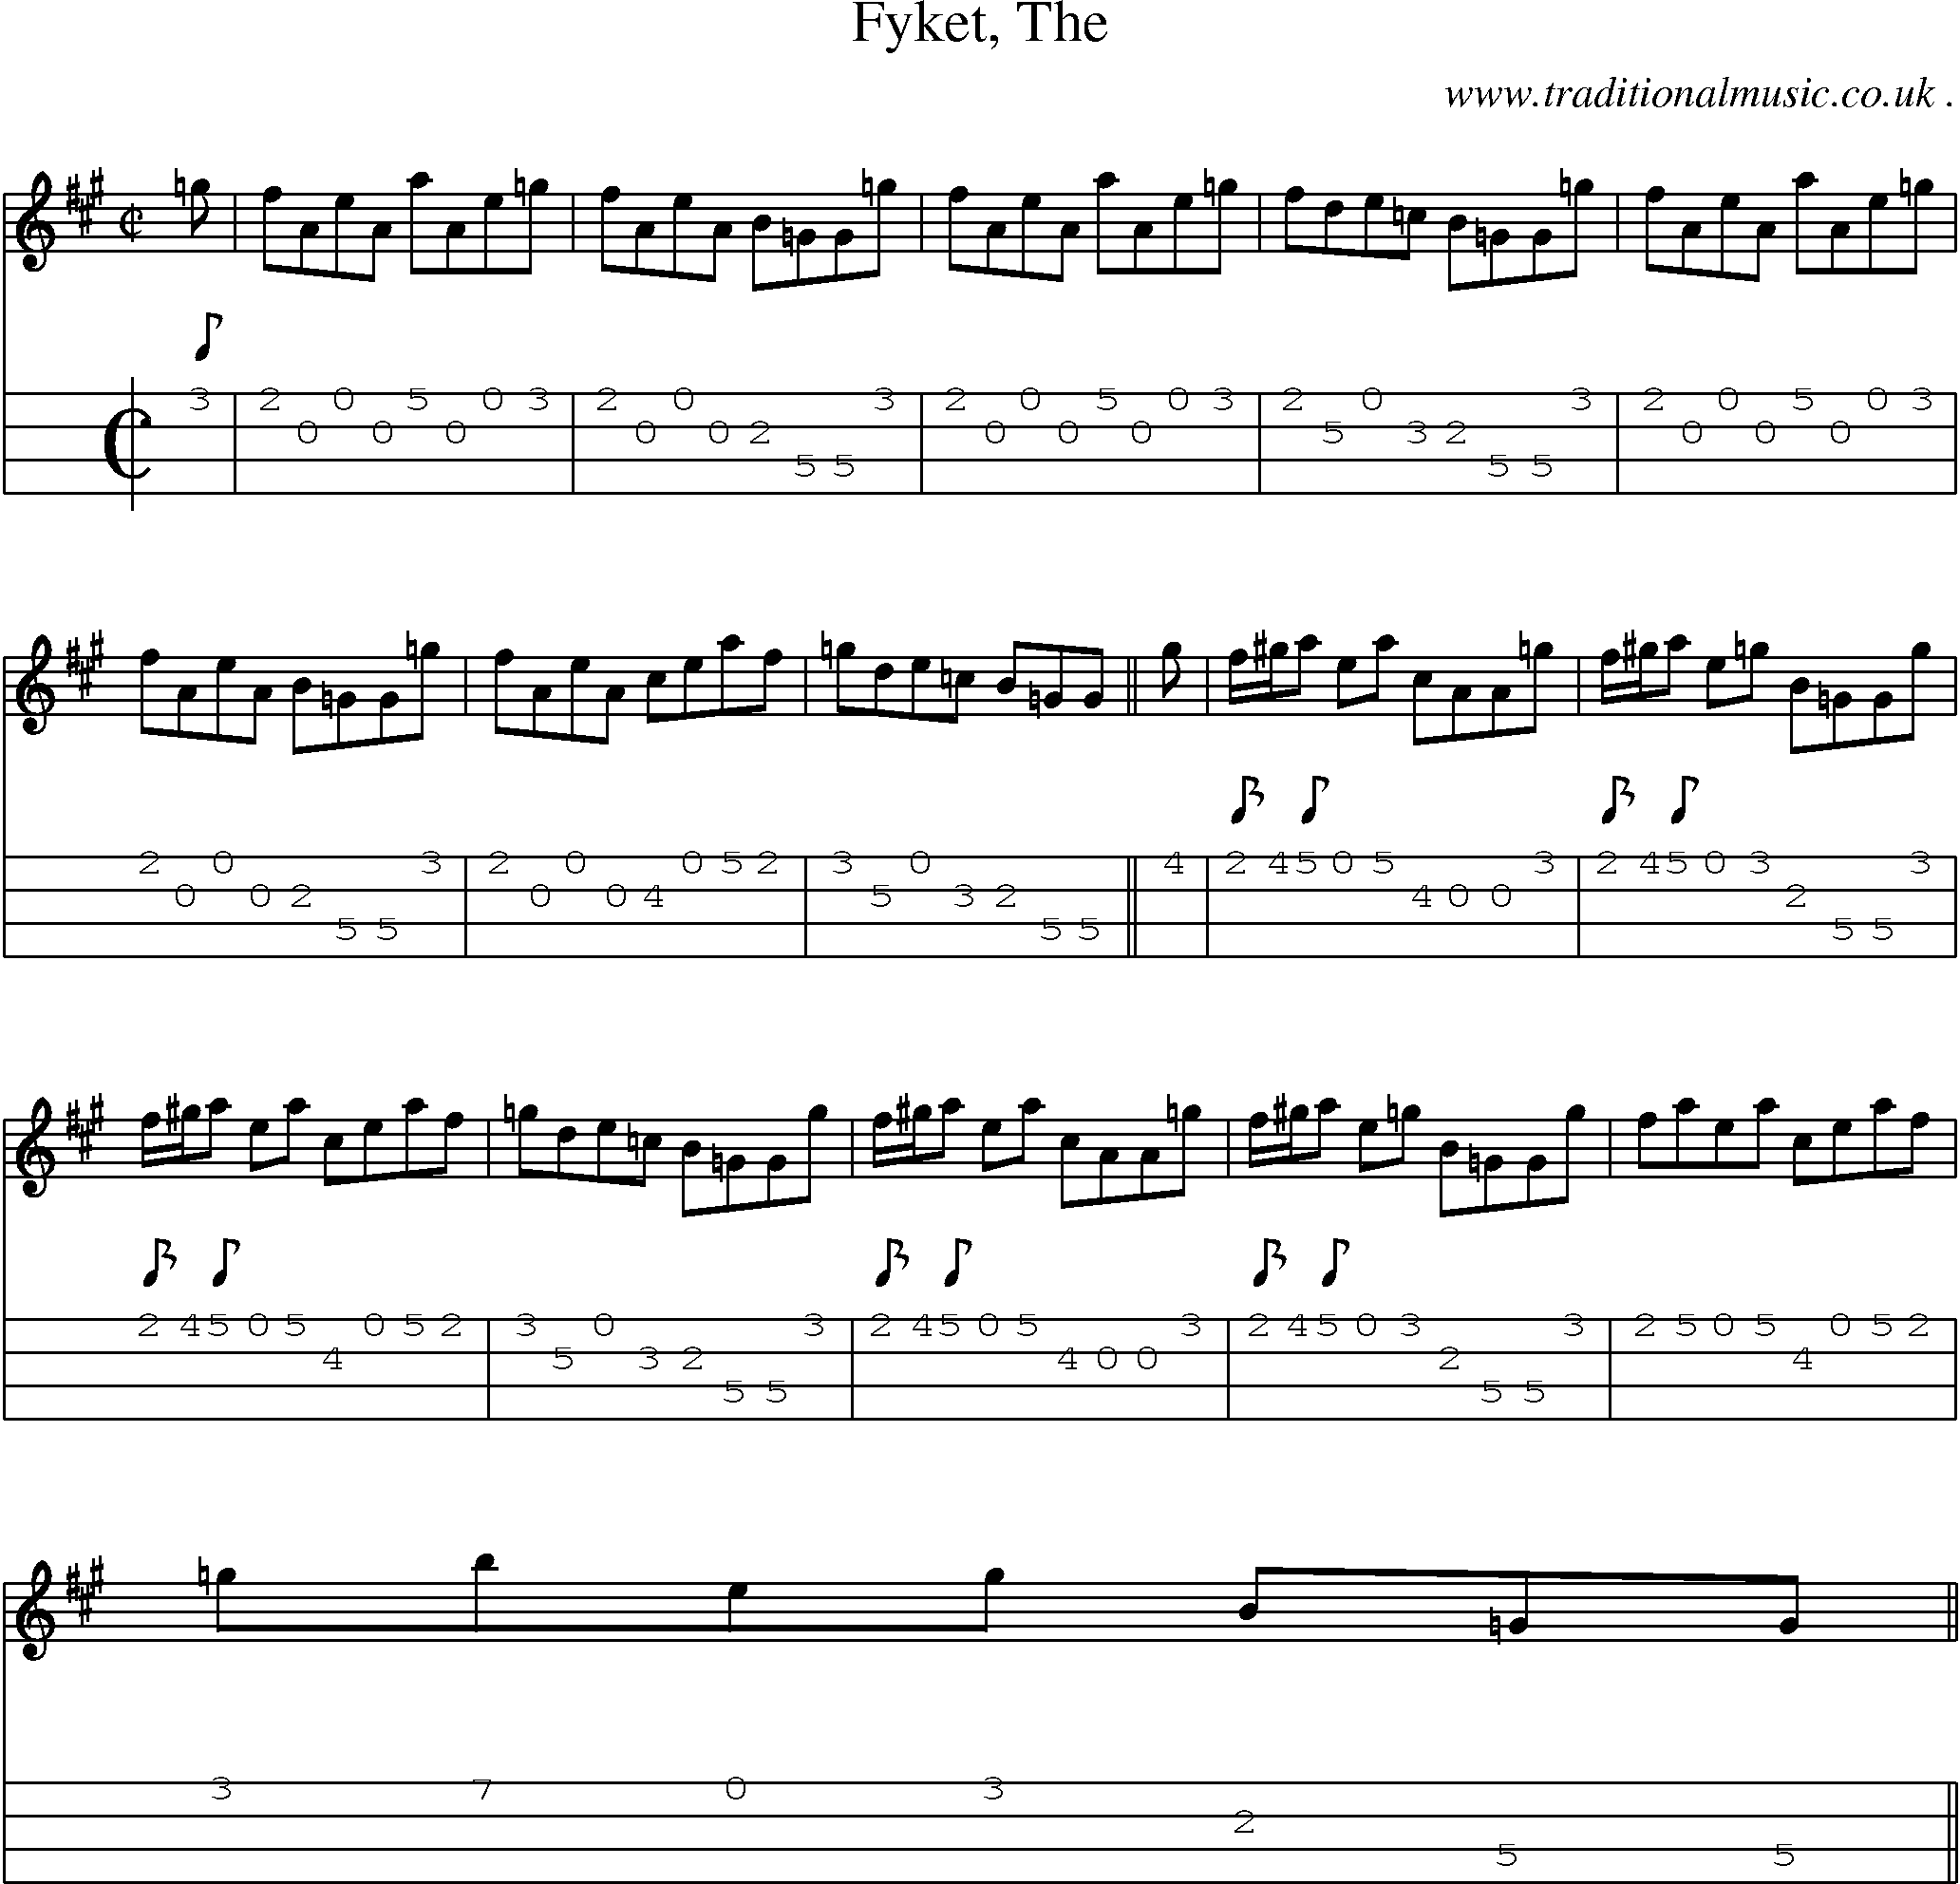 Sheet-music  score, Chords and Mandolin Tabs for Fyket The